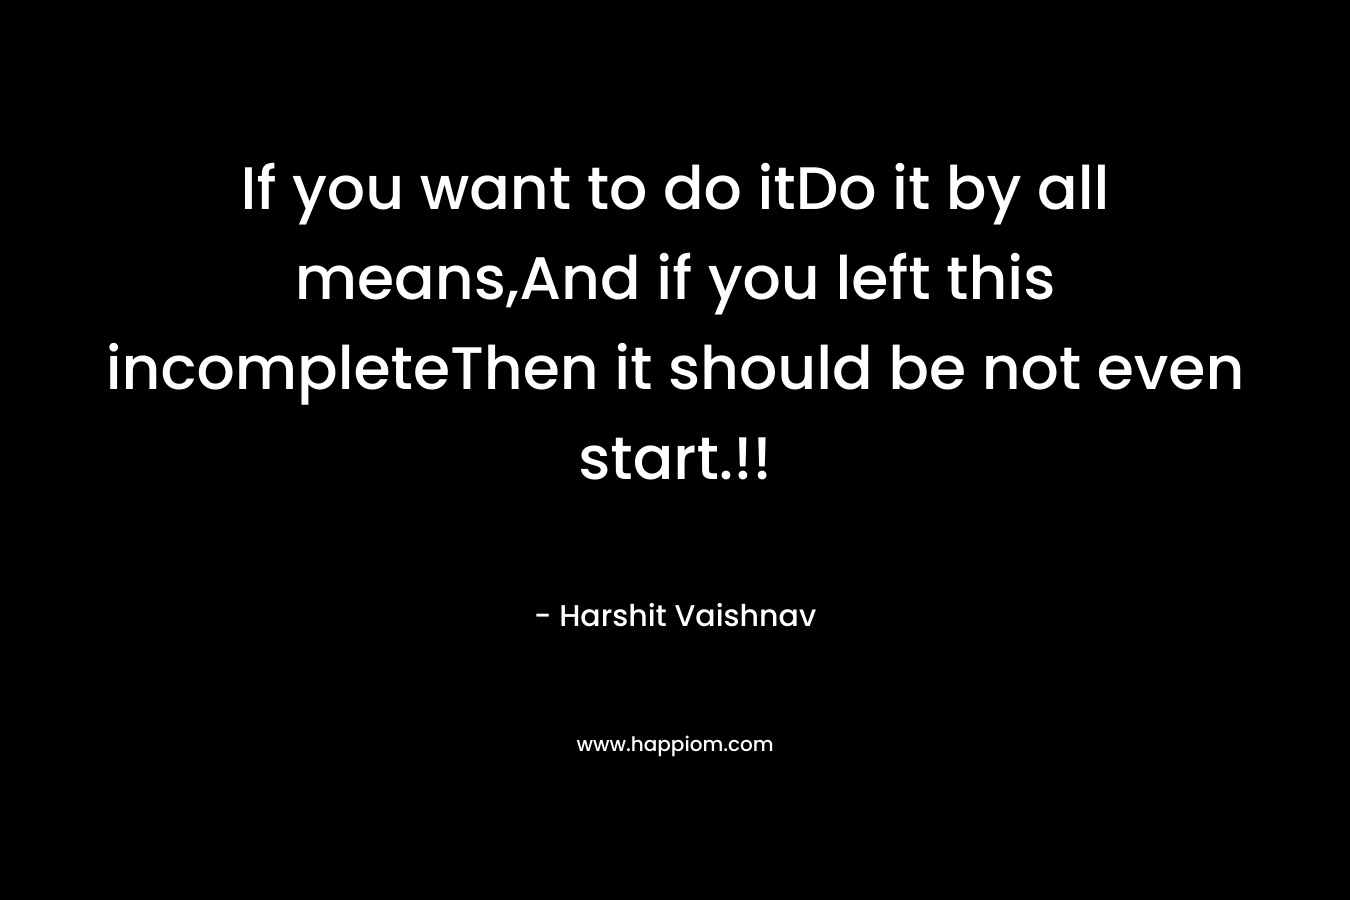 If you want to do itDo it by all means,And if you left this incompleteThen it should be not even start.!!